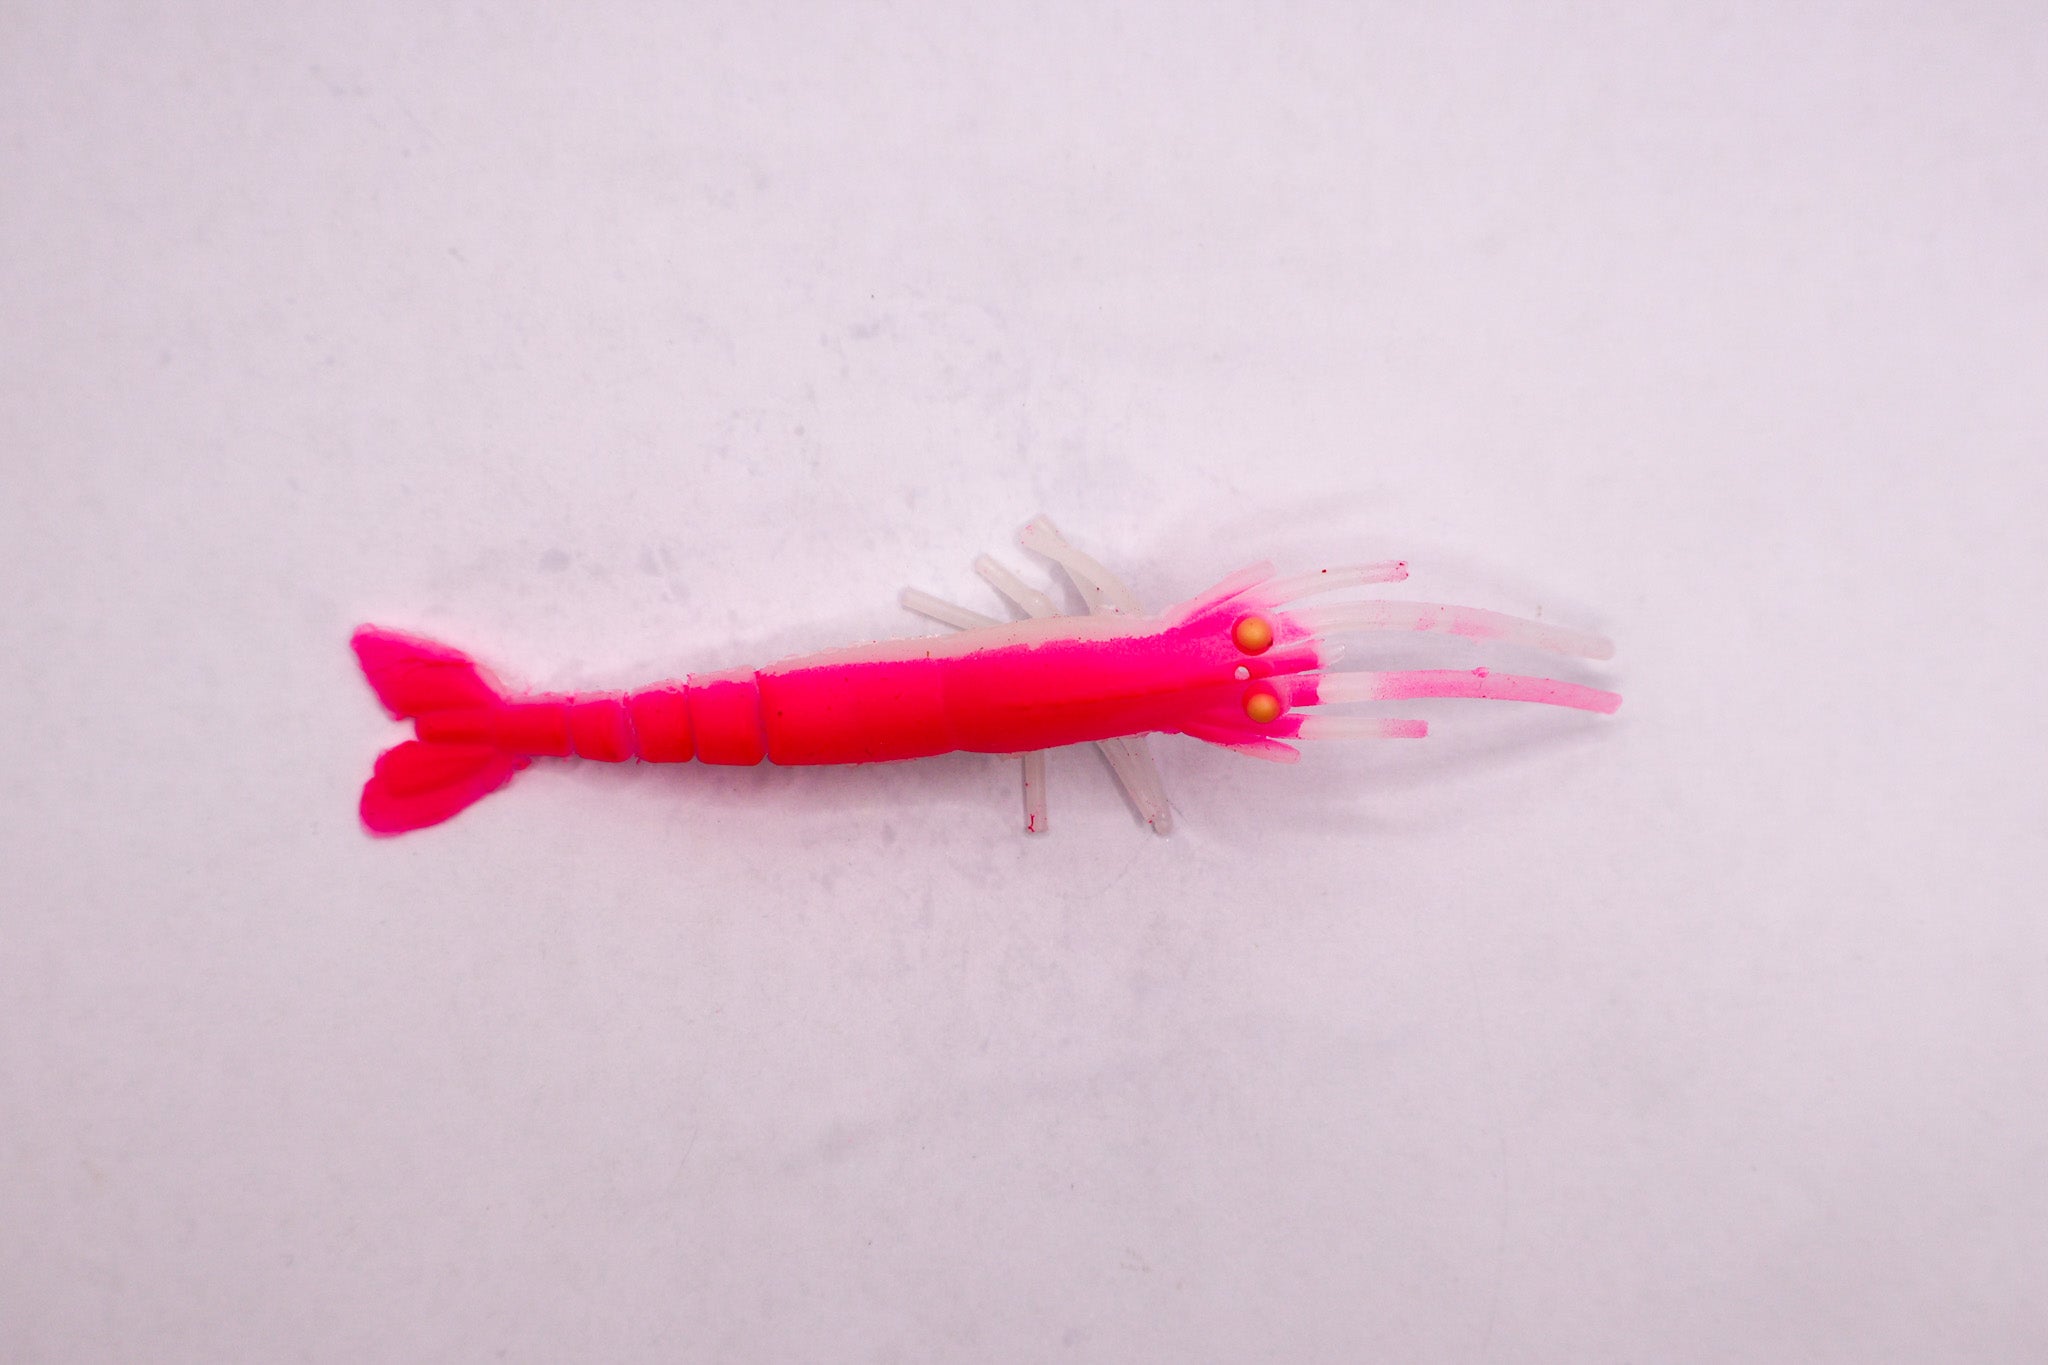 S Tackle Tail Dancer Pure White Pink Prawn UV Flasher Lure 3D 3" - 3 Pack